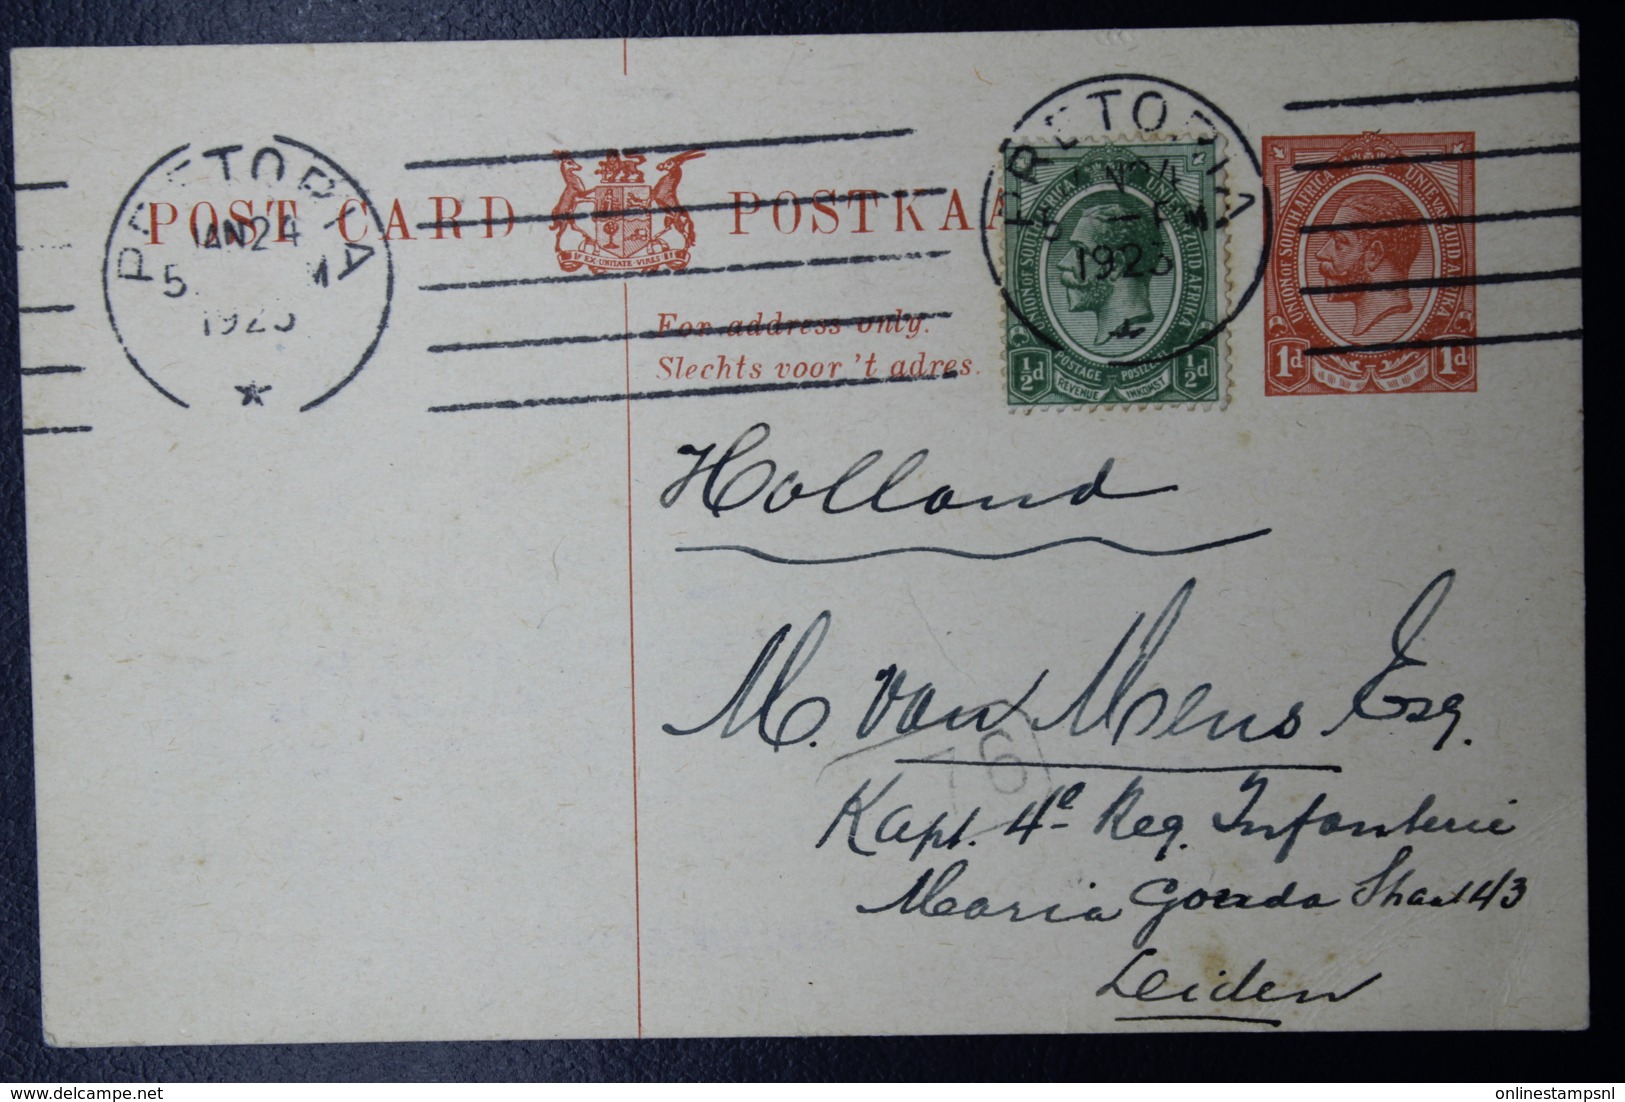 South Africa: Postcard P7  Pretoria To Leiden Holland   24-1-1923 Uprated - Covers & Documents